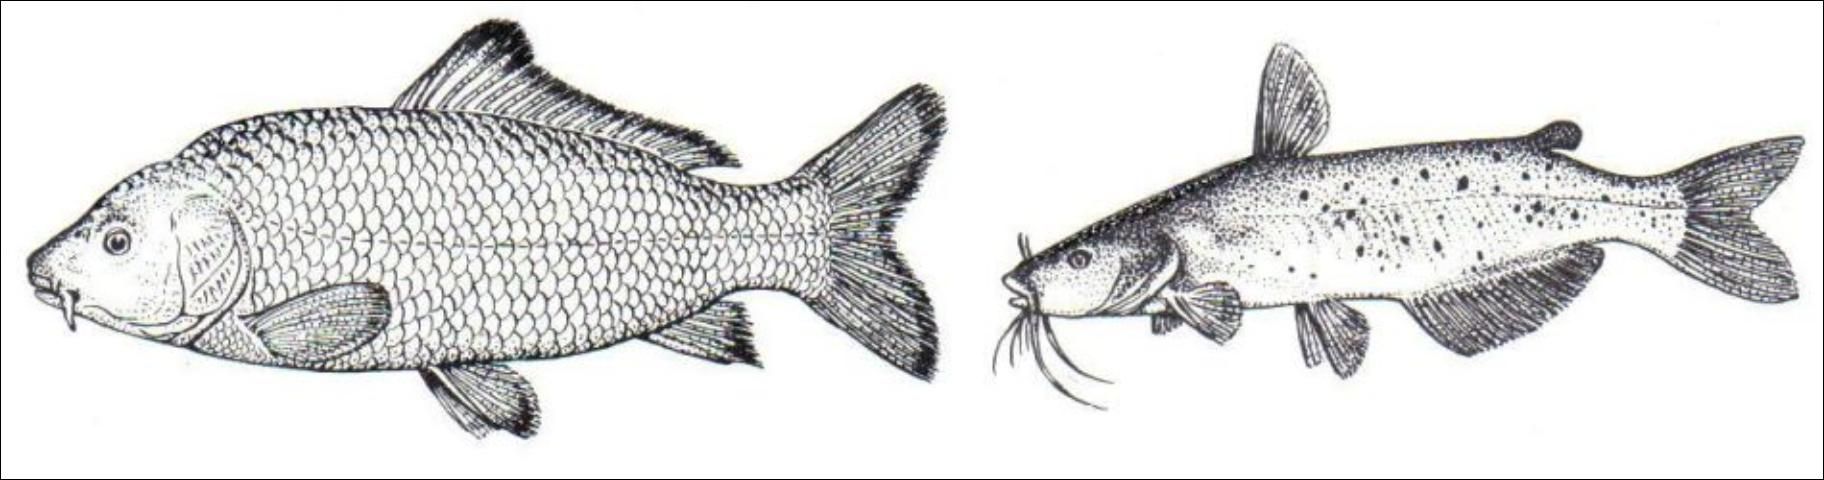 Figure 2. Carp and channel catfish with subterminal mouth.